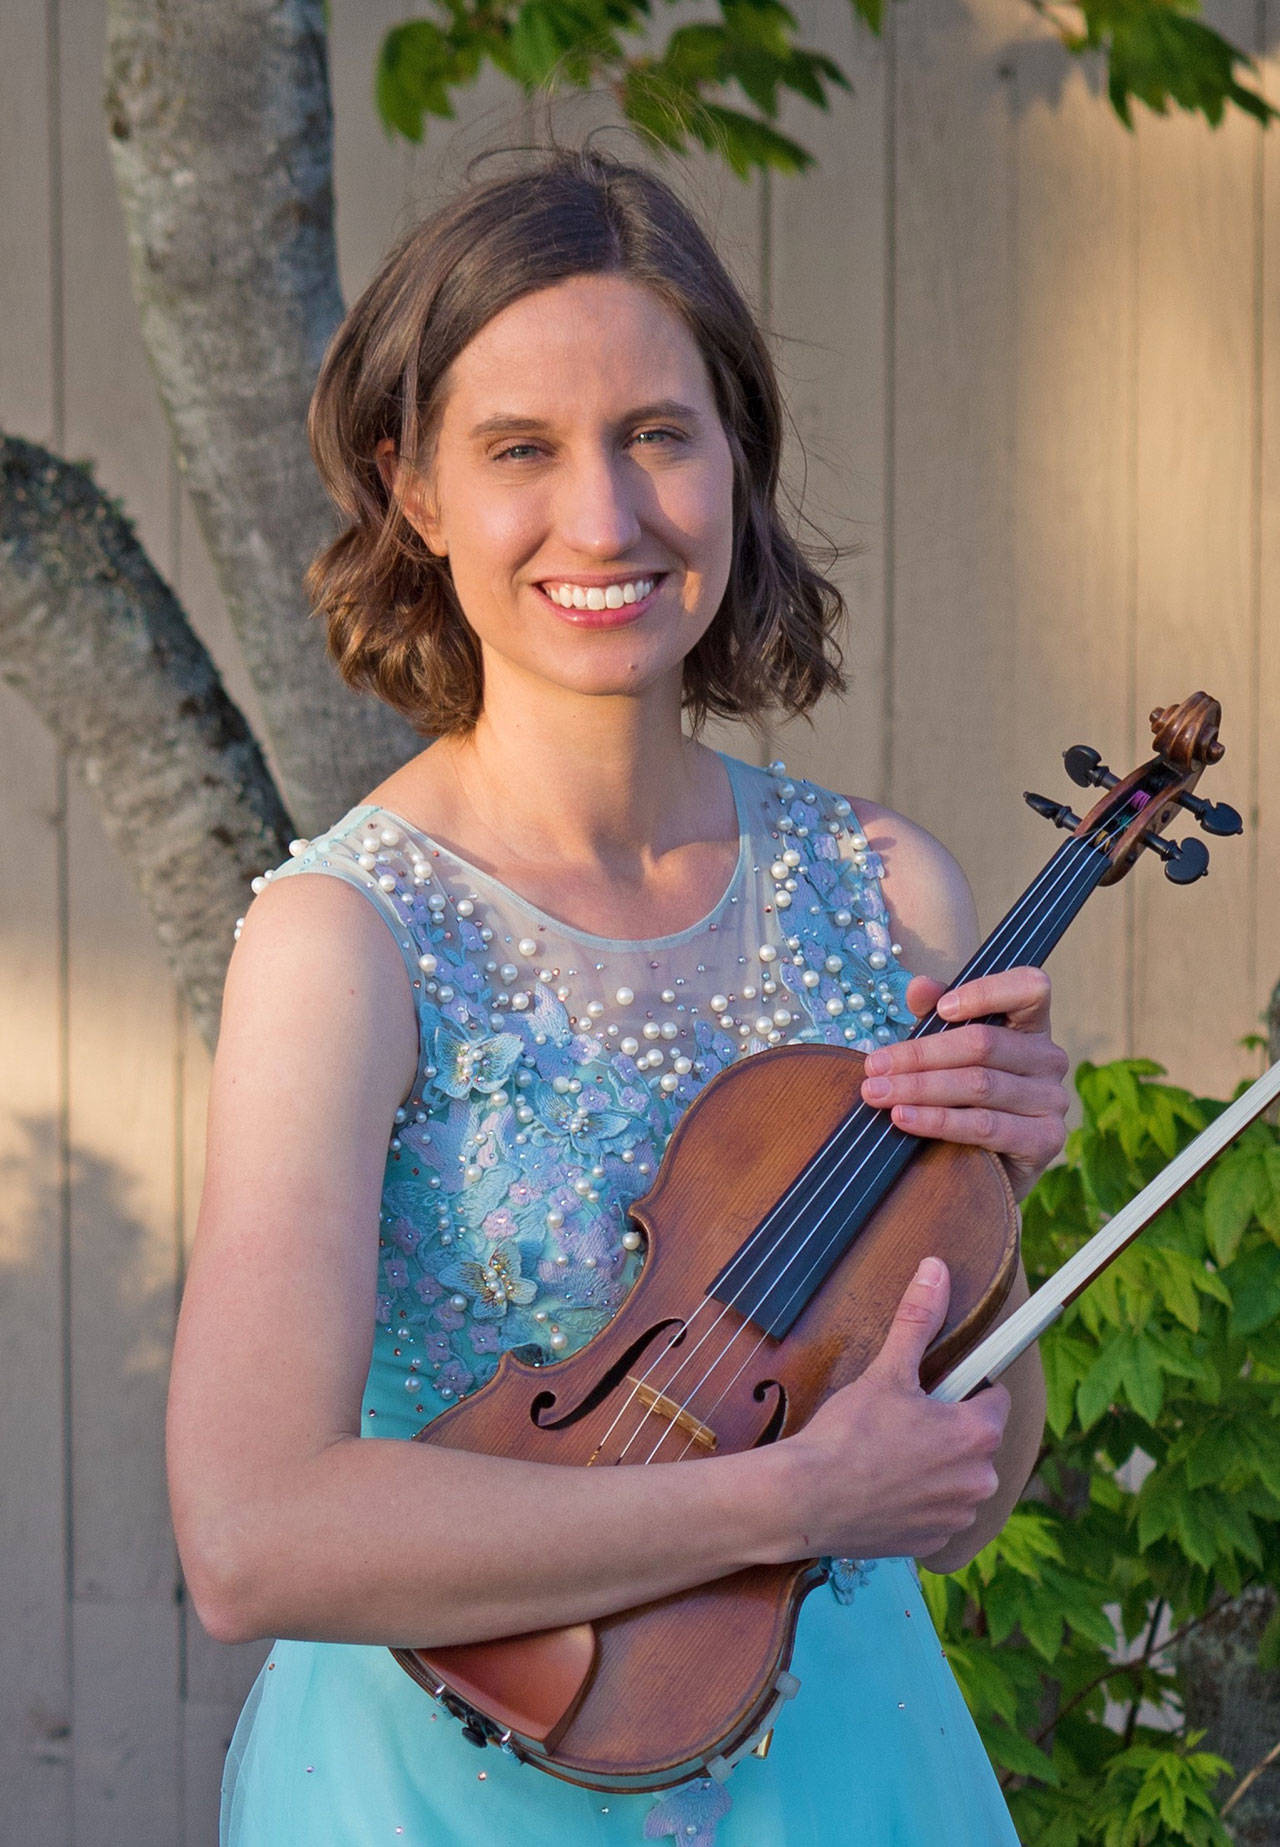 Heather Ray is a featured soloist with the Port Angeles Symphony’s Pops & Picnic concerts on Friday, Sept. 27, and Saturday Sept. 28. Photo courtesy of Port Angeles Symphony